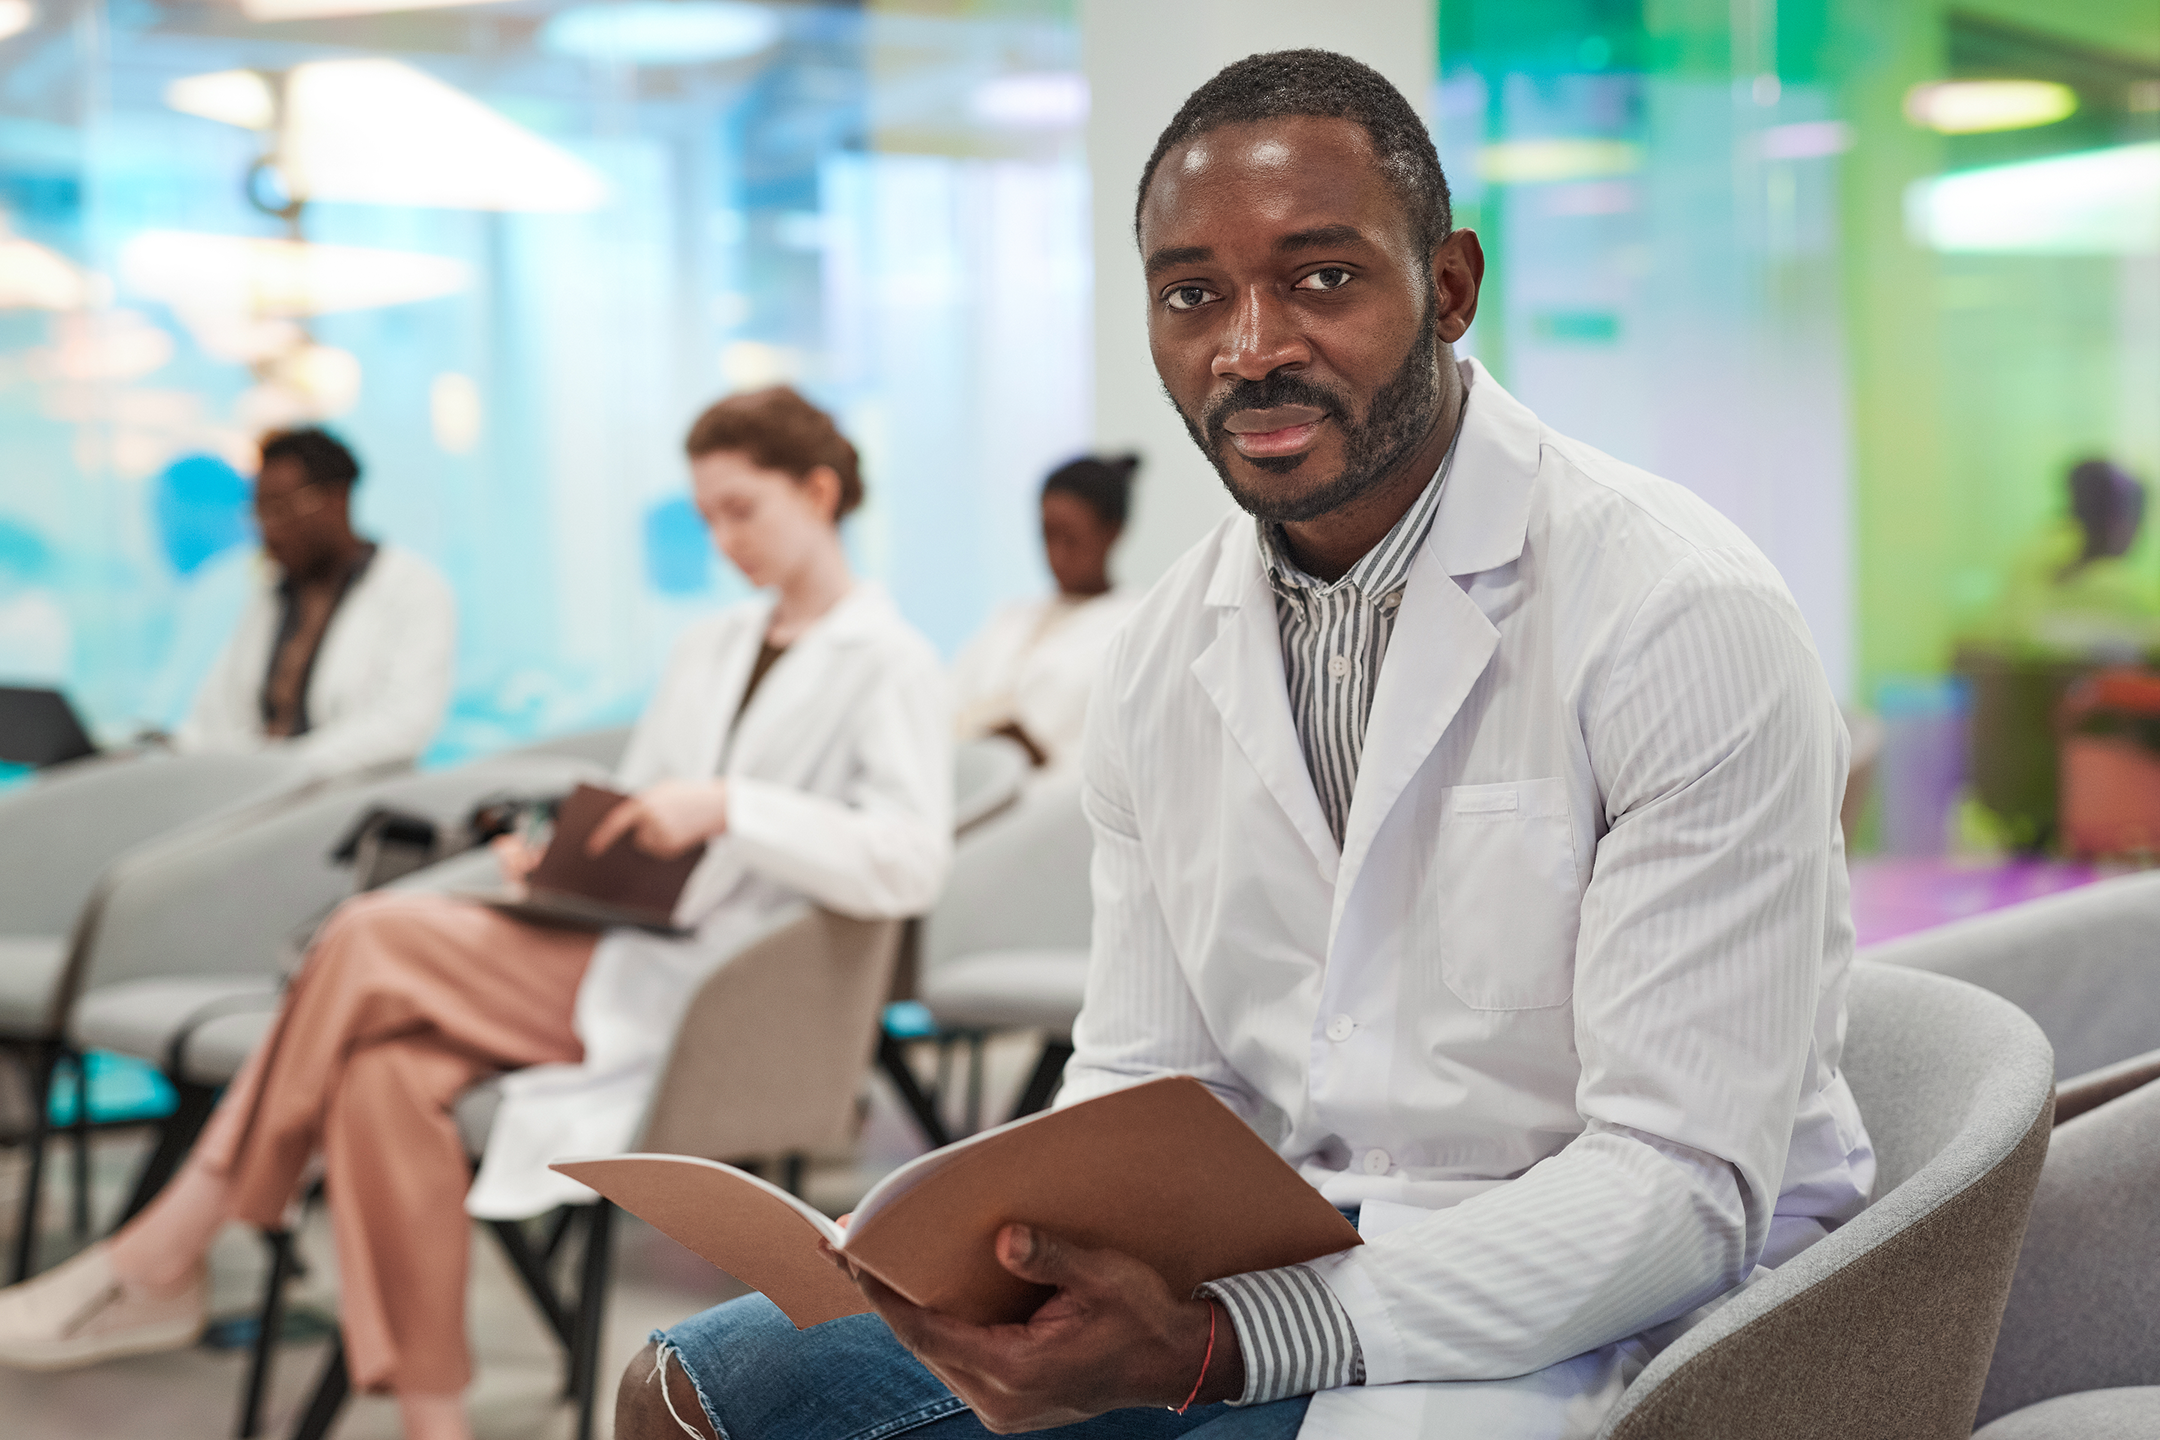 Employment-based immigration considerations for hiring qualified foreign physicians